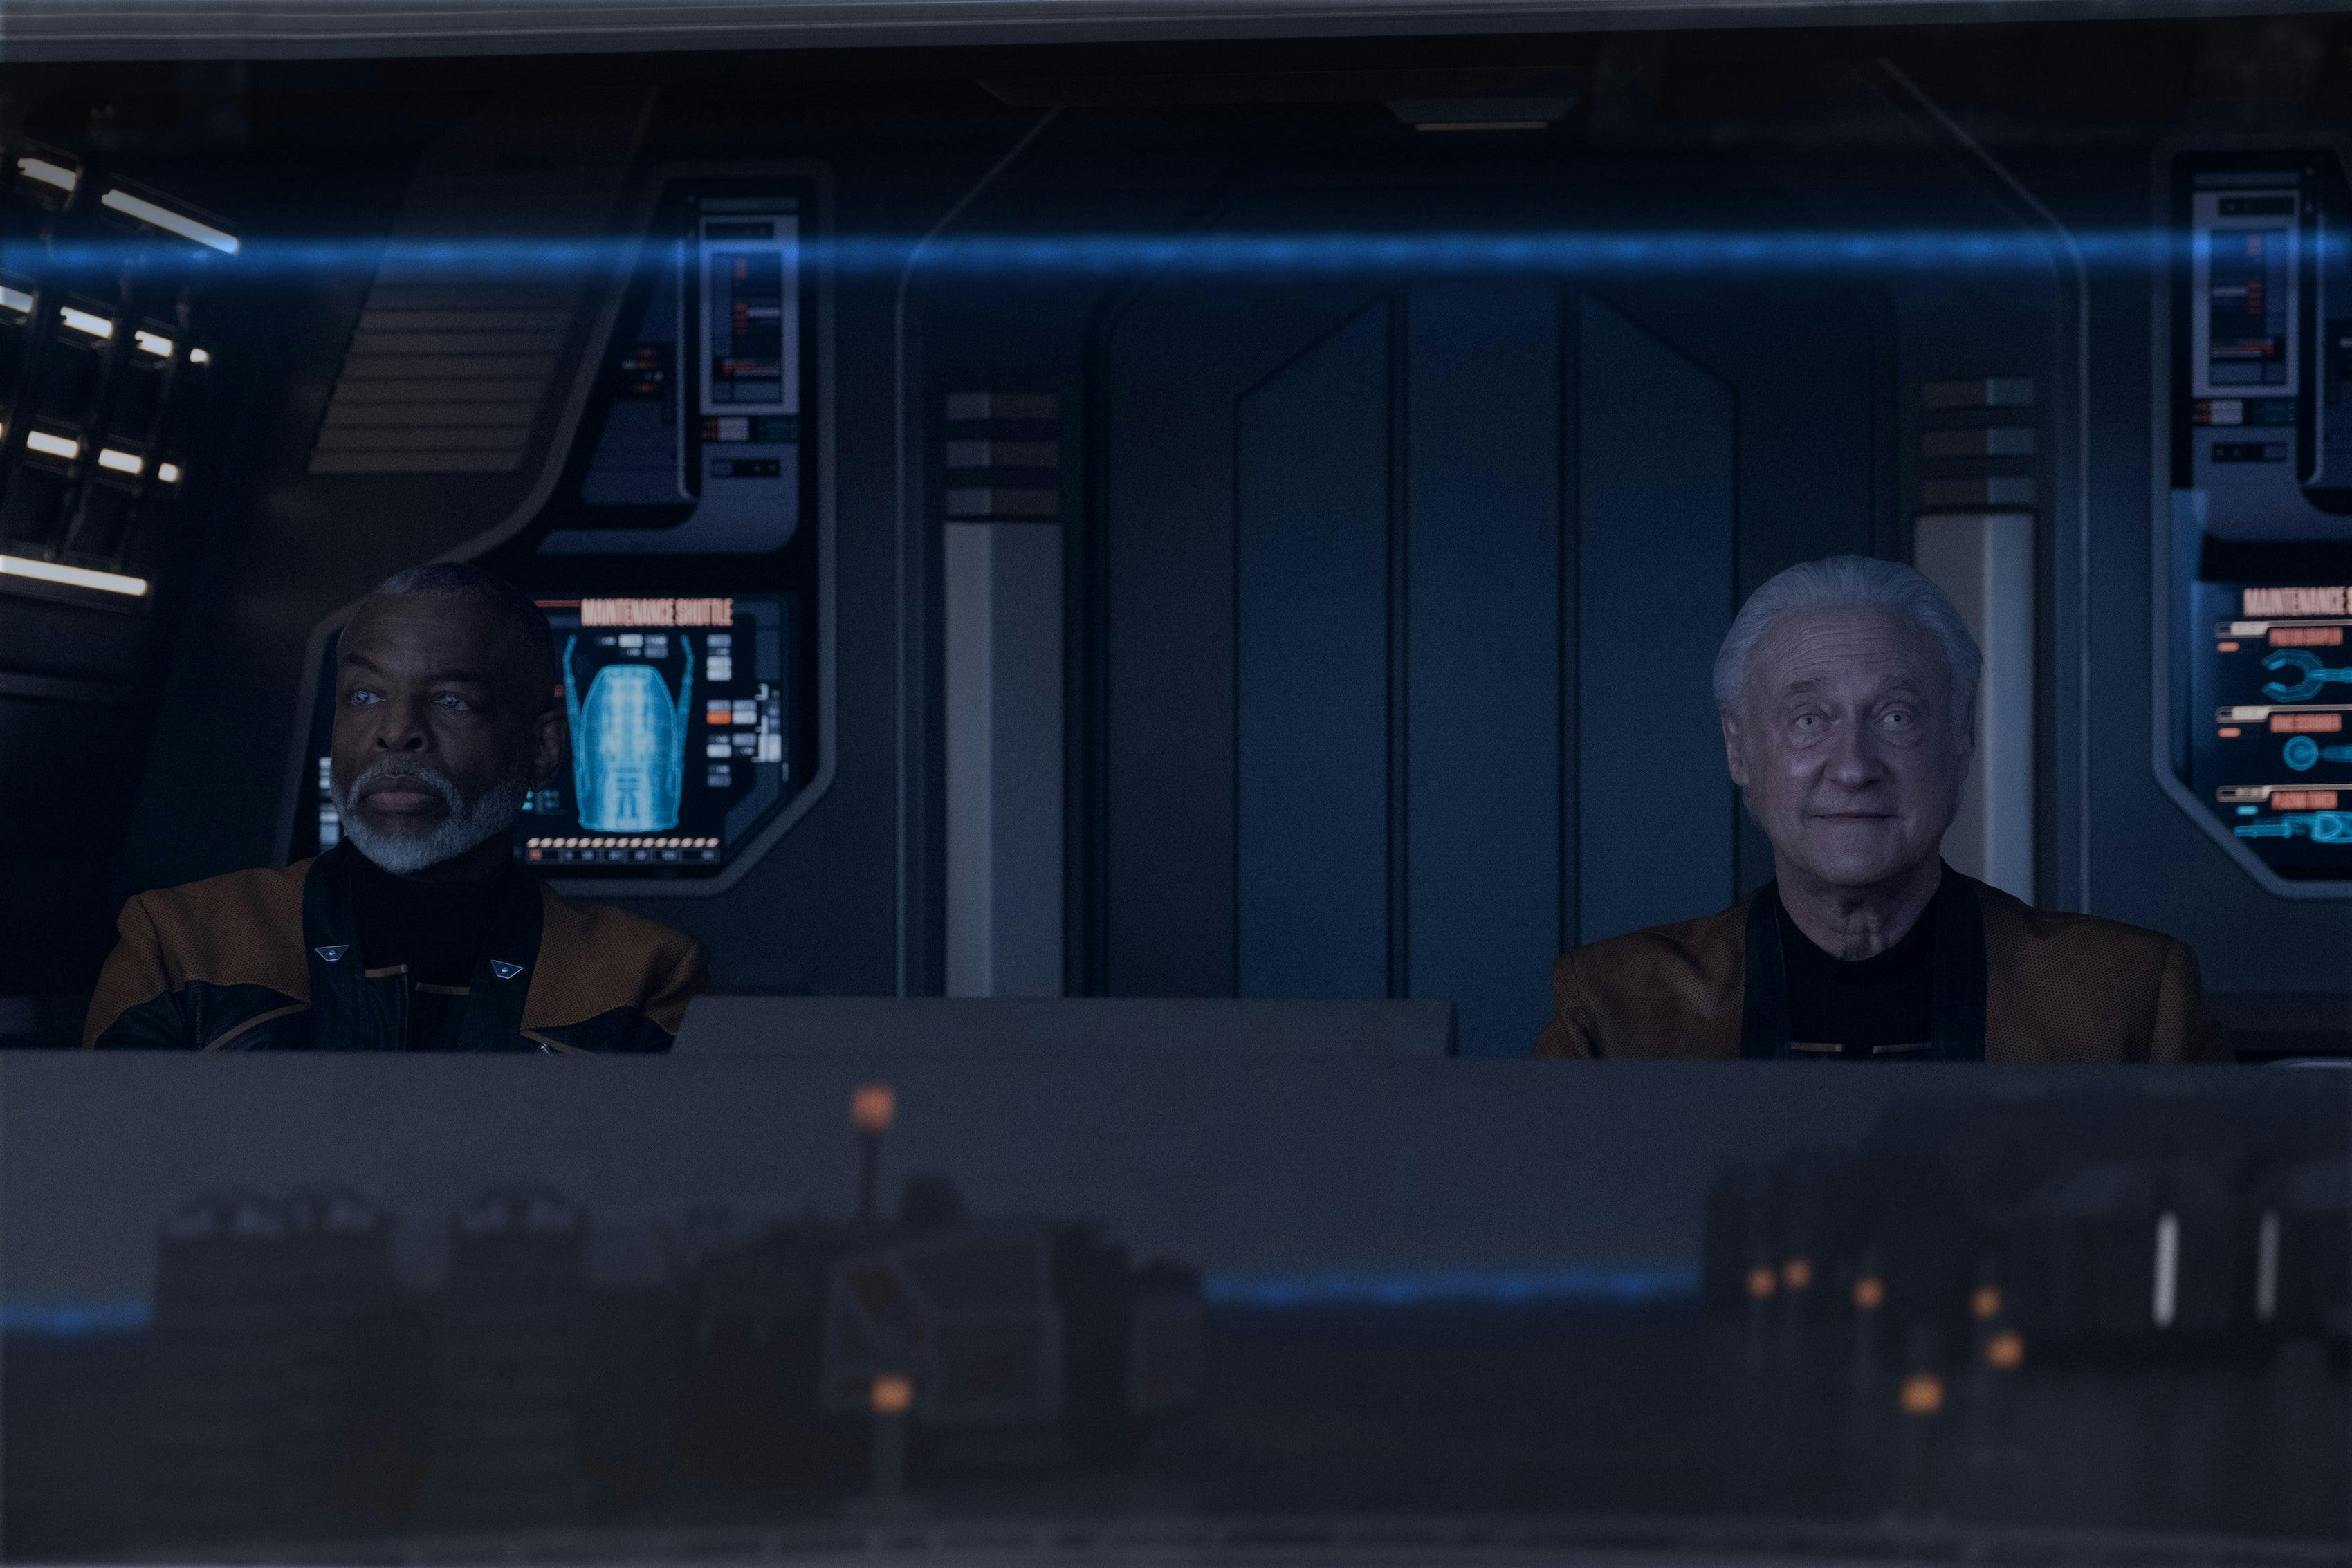 In a shuttle, Commodore Geordi La Forge looks off to his left with a blank expression as Data with a smile looks ahead of himself (Star Trek: Picard, "Vox")